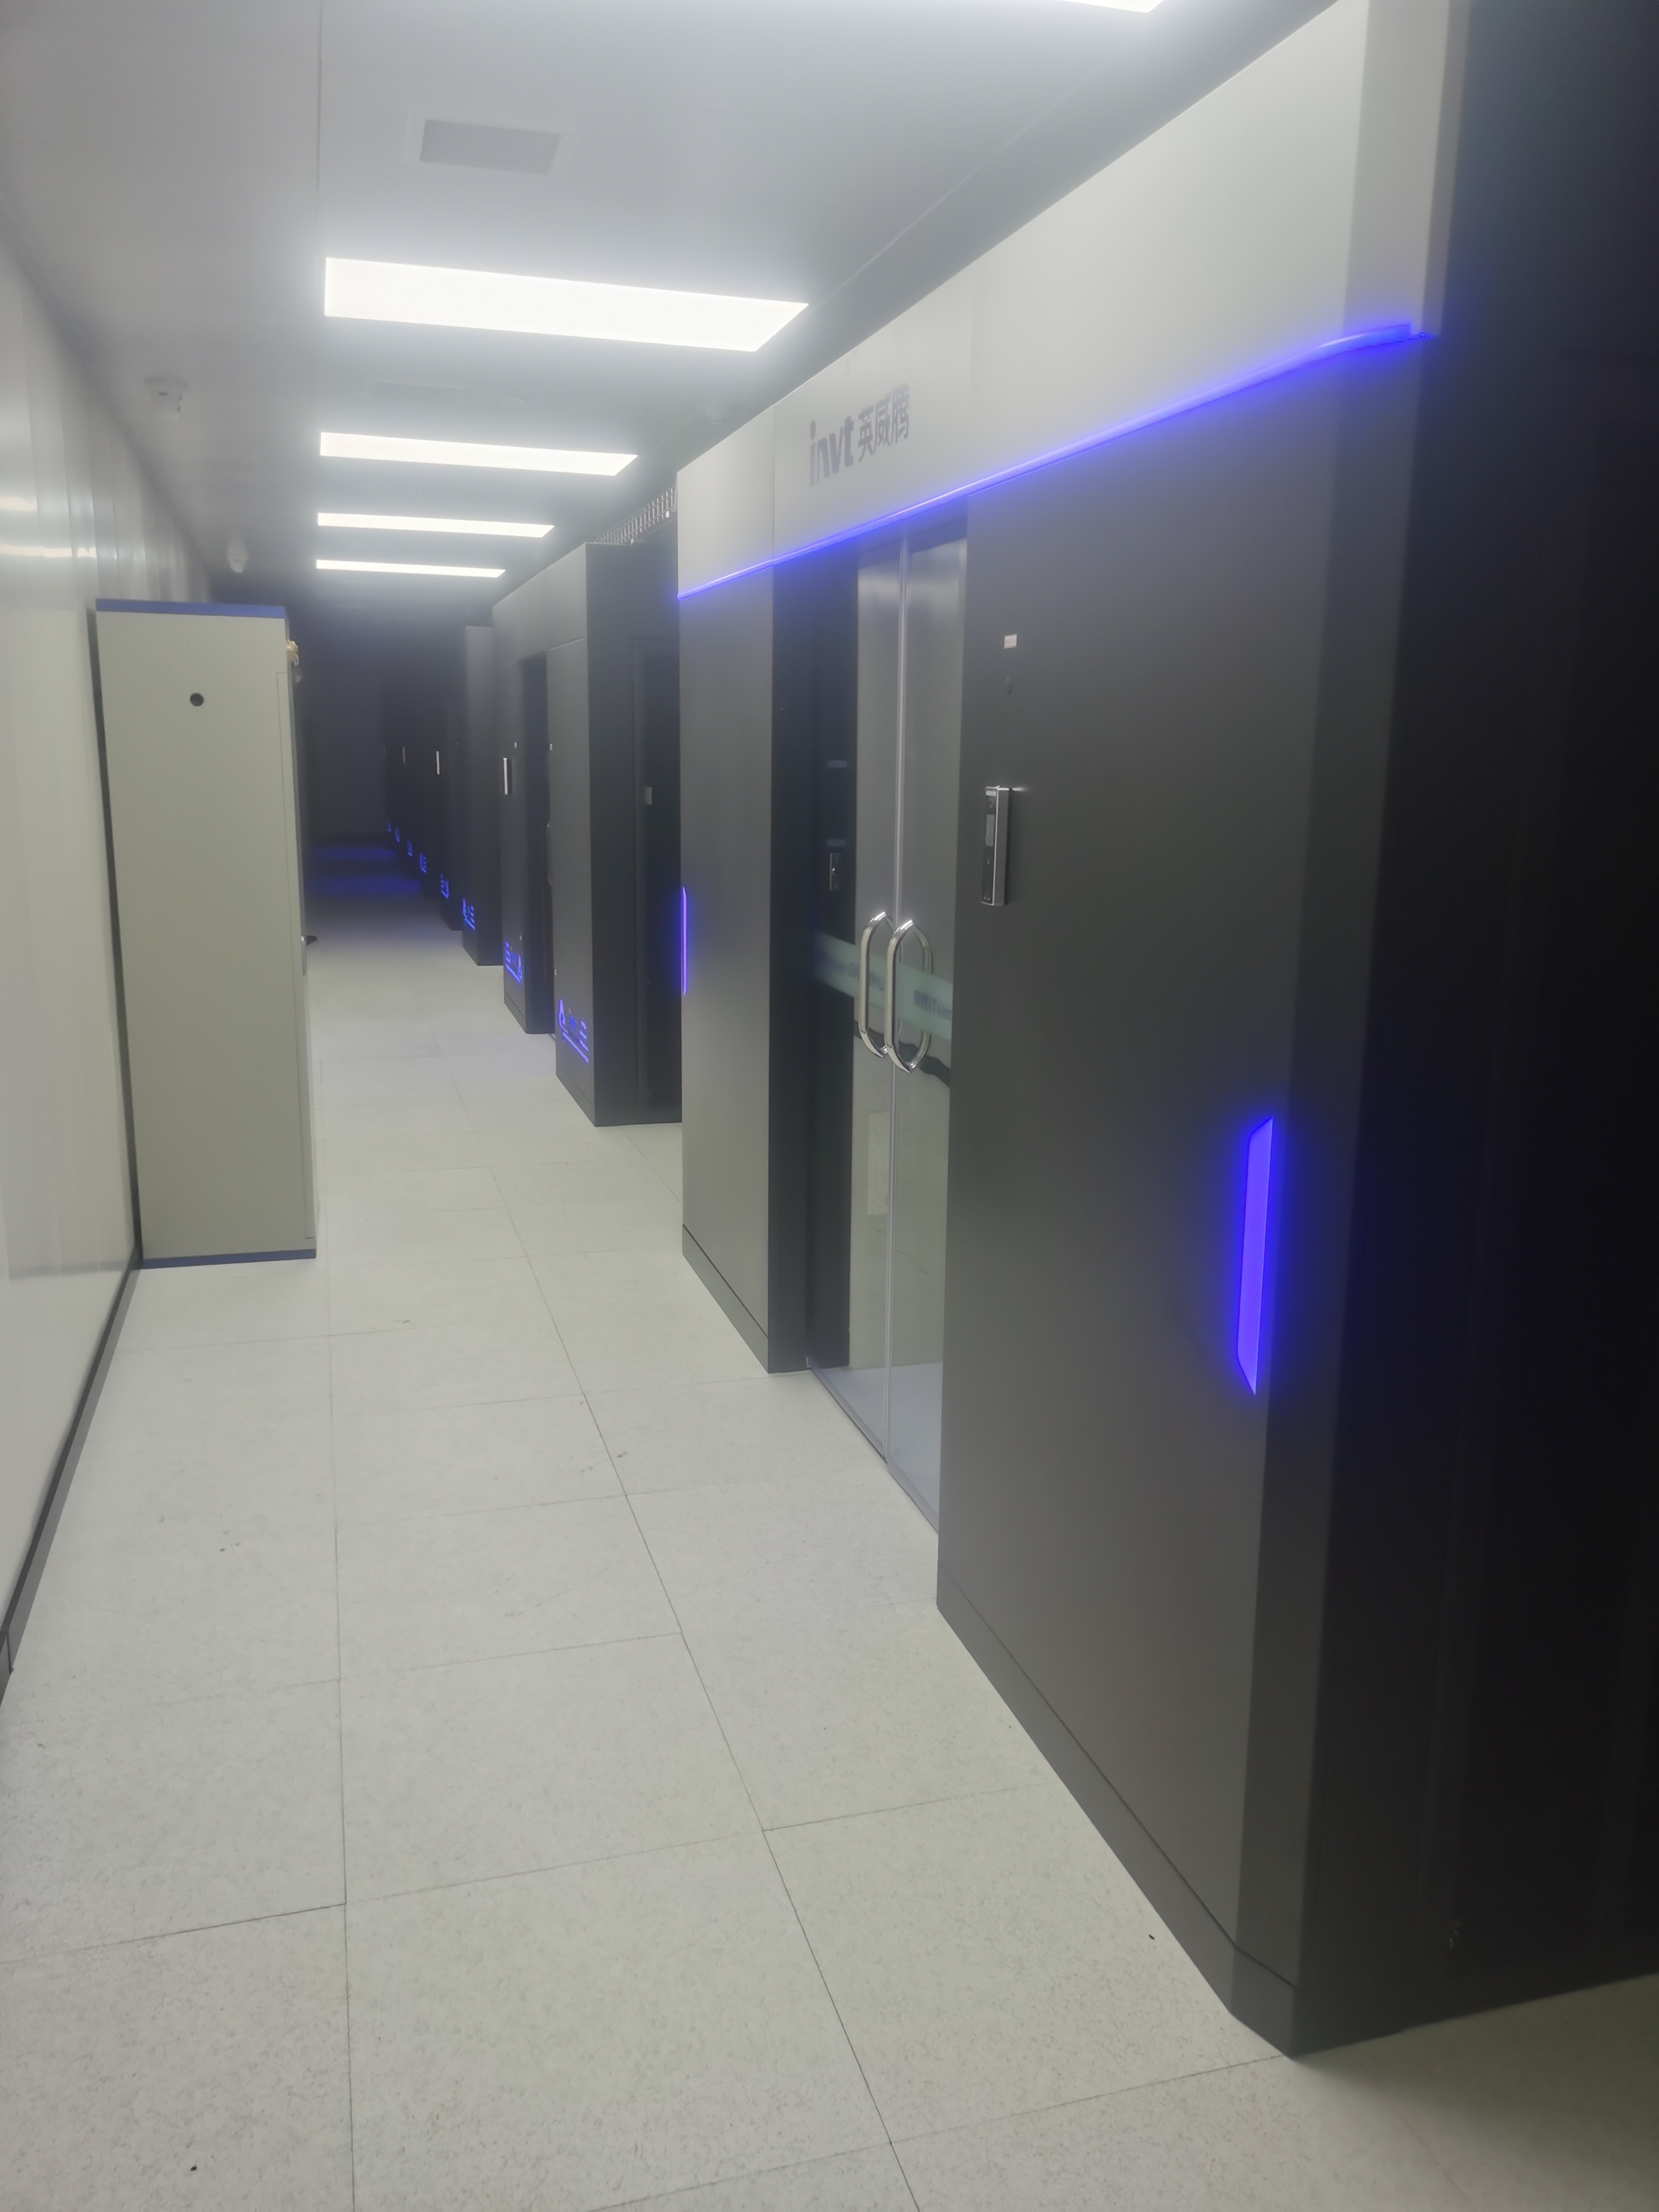 iTalent modular data center solution used in Baicheng Normal University project